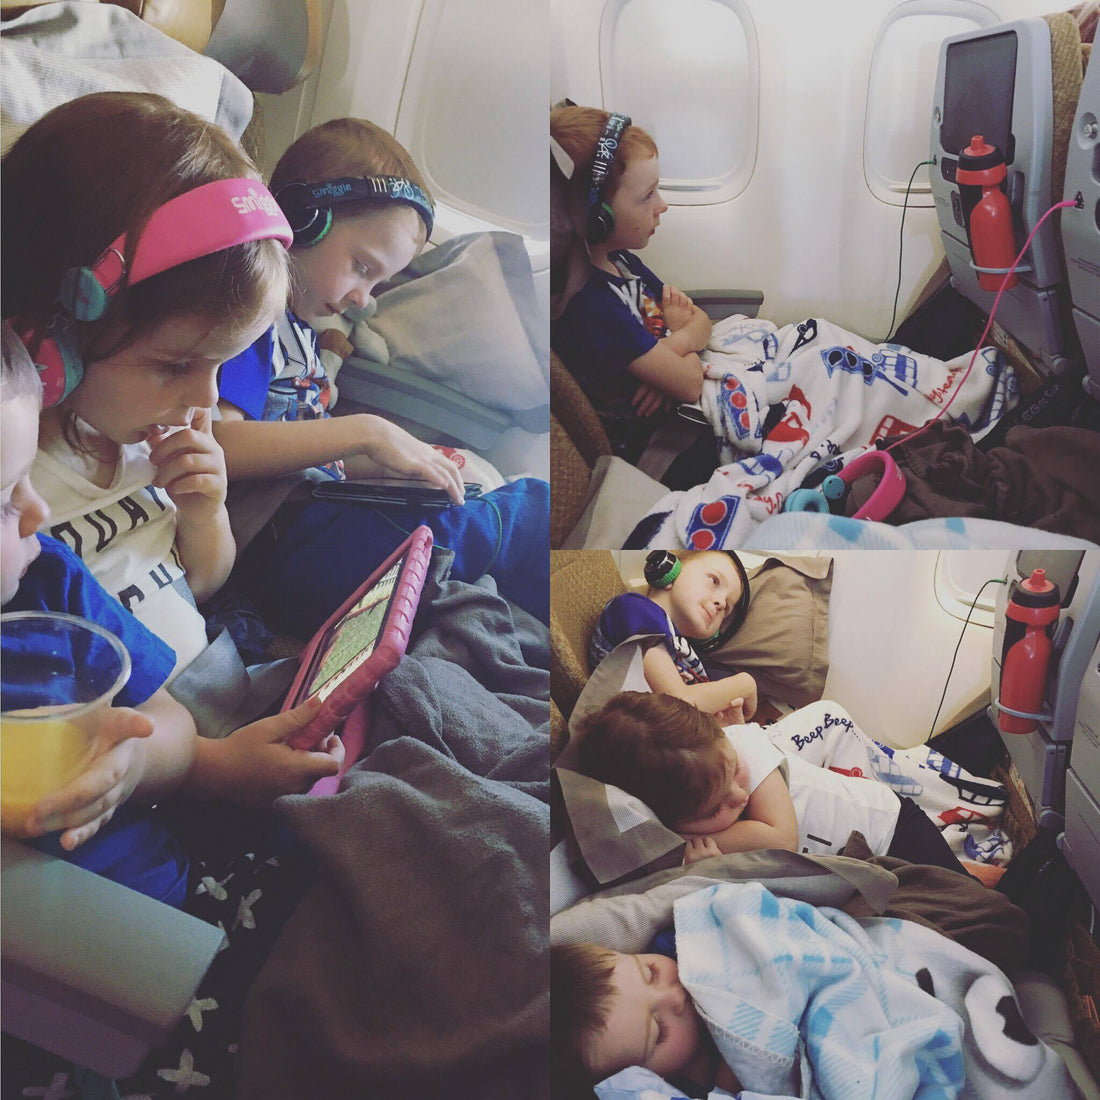 "Mummy and Daddy even managed to get some sleep too" - Jane, Singapore Airlines